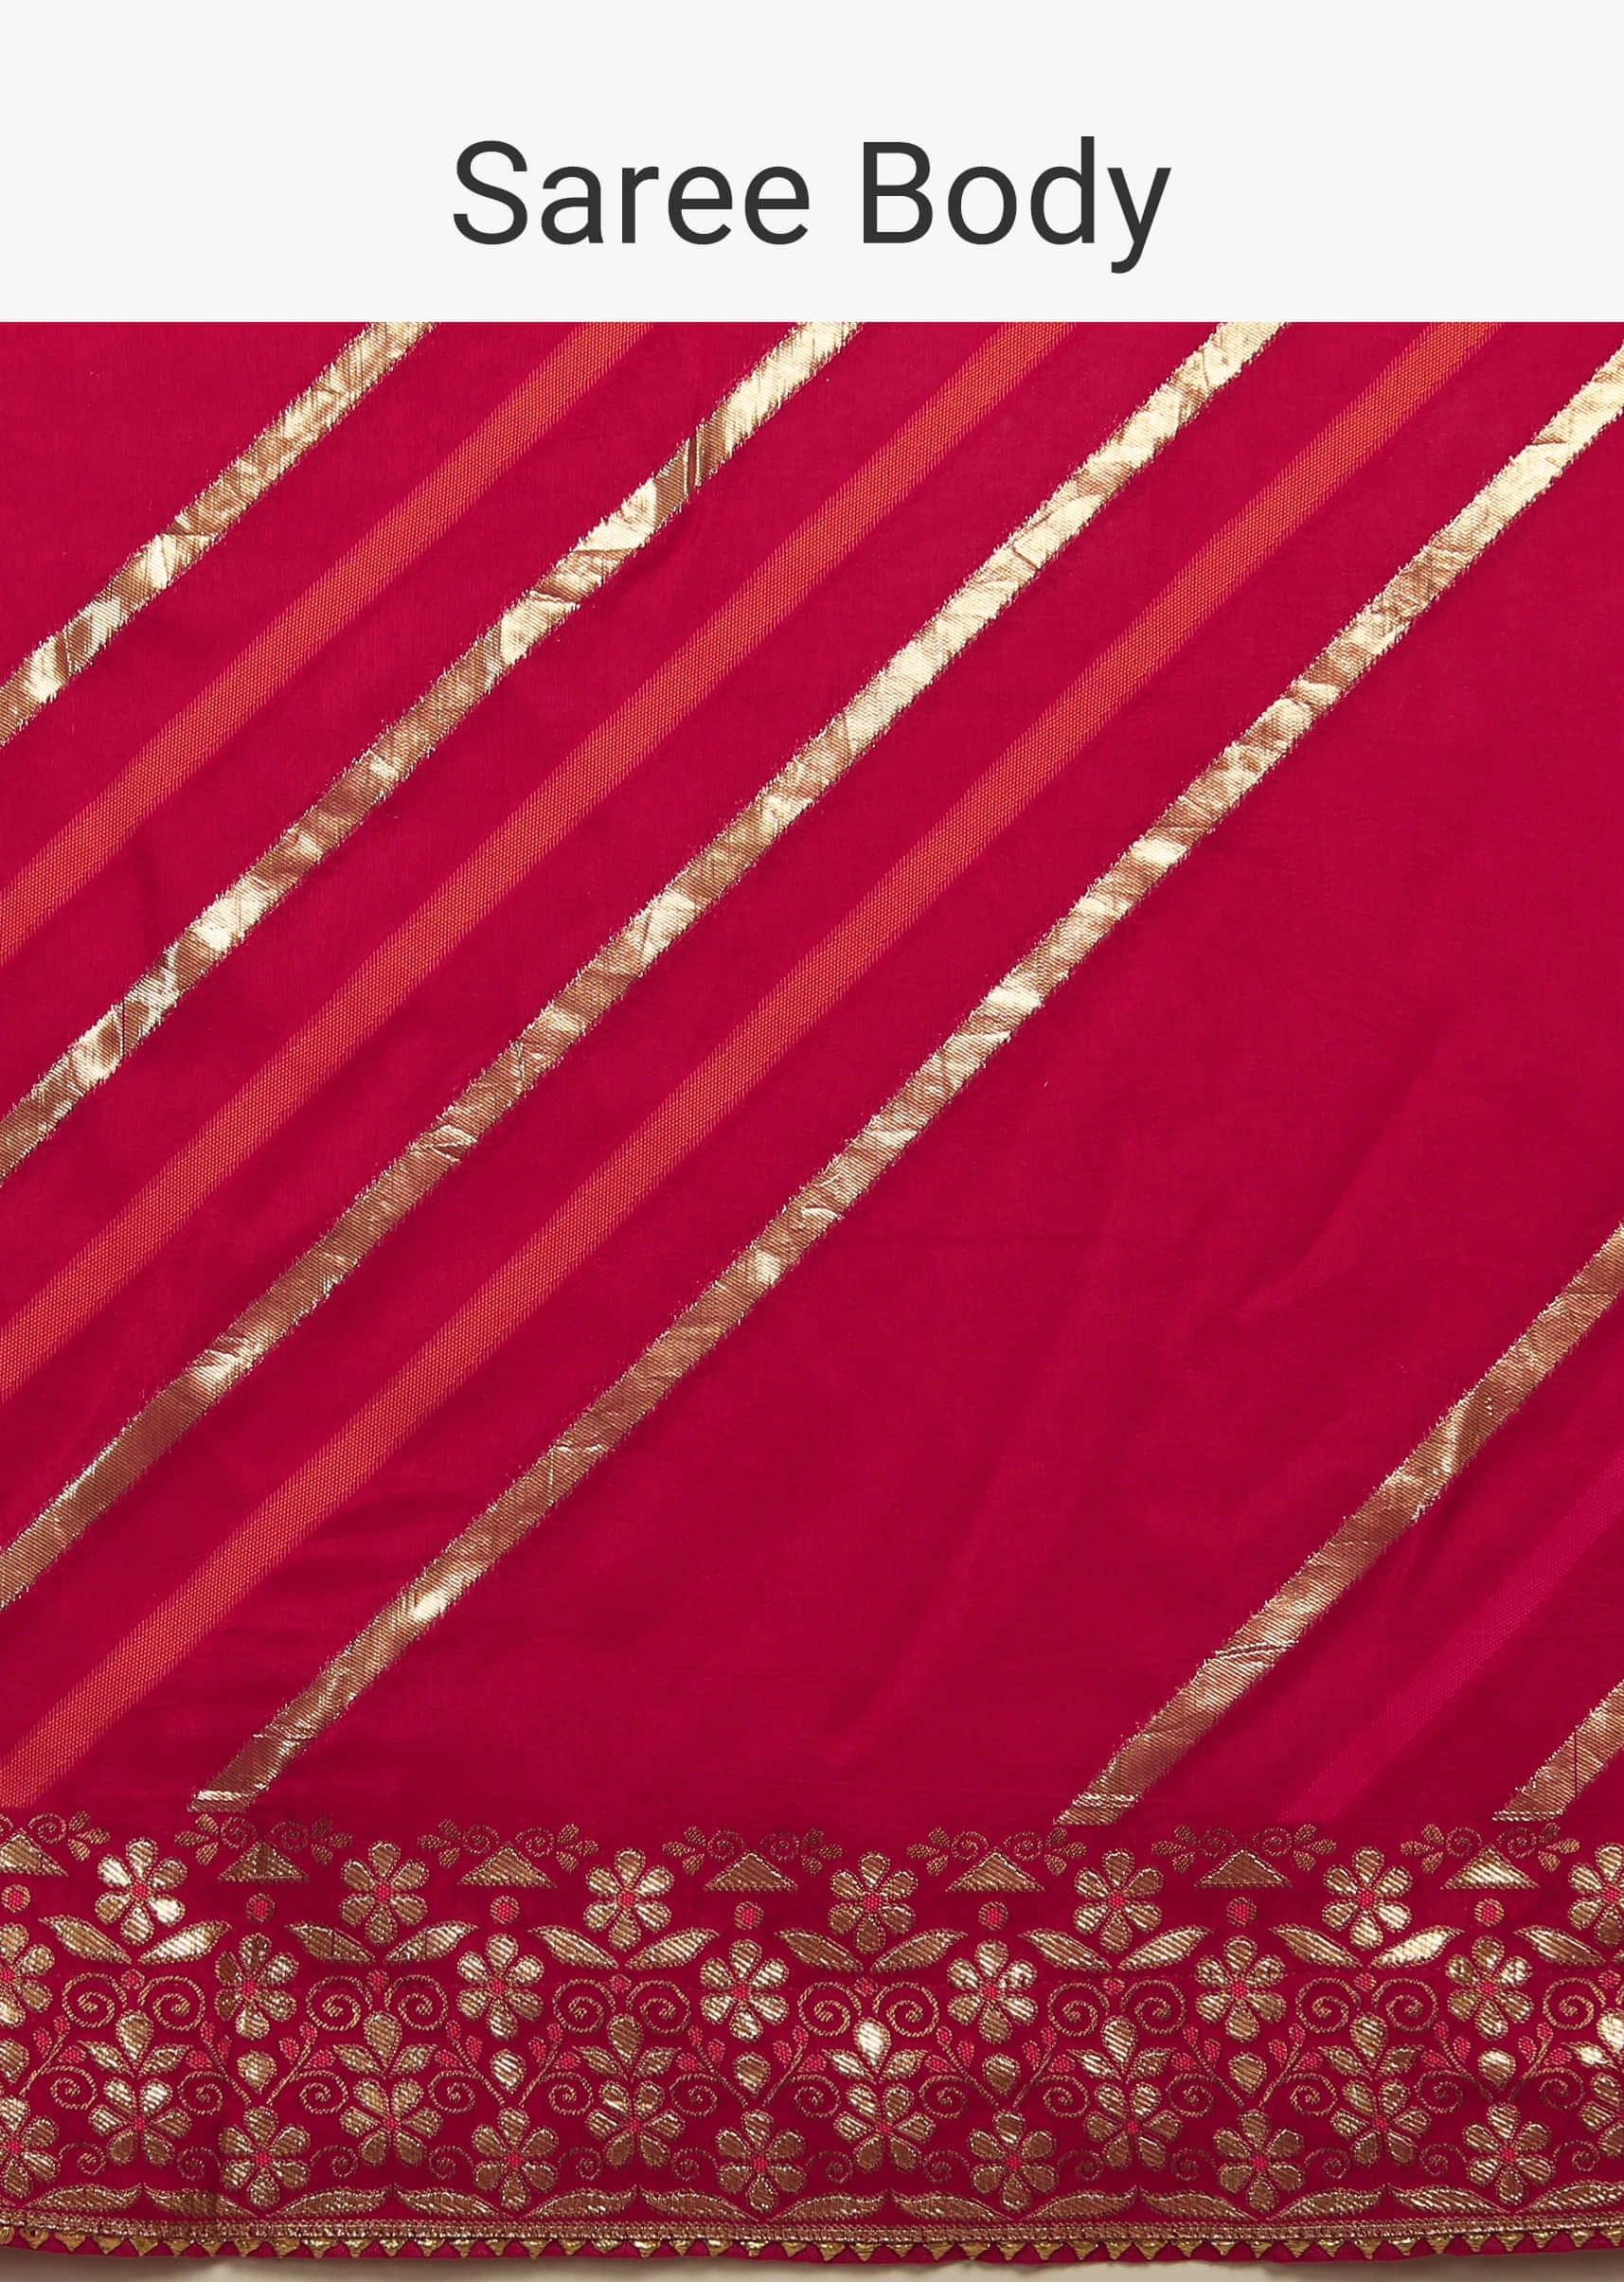 Rani Pink Saree In Dola Silk With Multi Colored Woven Diagonal Stripes And Floral Border